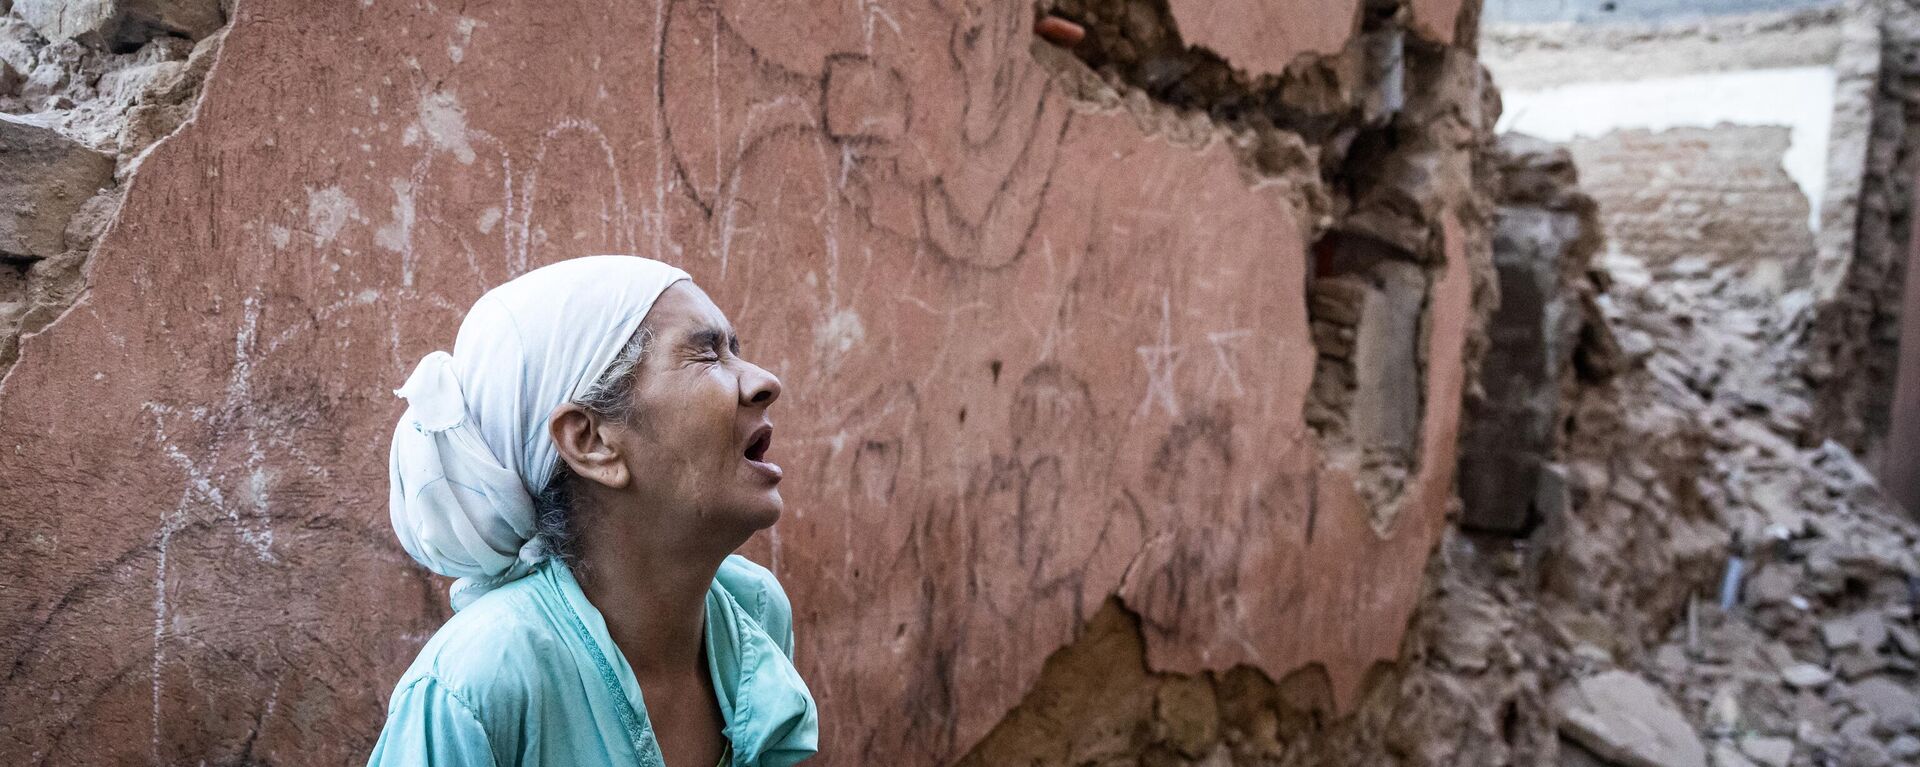 A woman reacts standing infront of her earthquake-damaged house in the old city in Marrakesh on September 9, 2023. A powerful earthquake that shook Morocco late September 8 killed more than 600 people, interior ministry figures showed, sending terrified residents fleeing their homes in the middle of the night. - Sputnik Africa, 1920, 09.09.2023